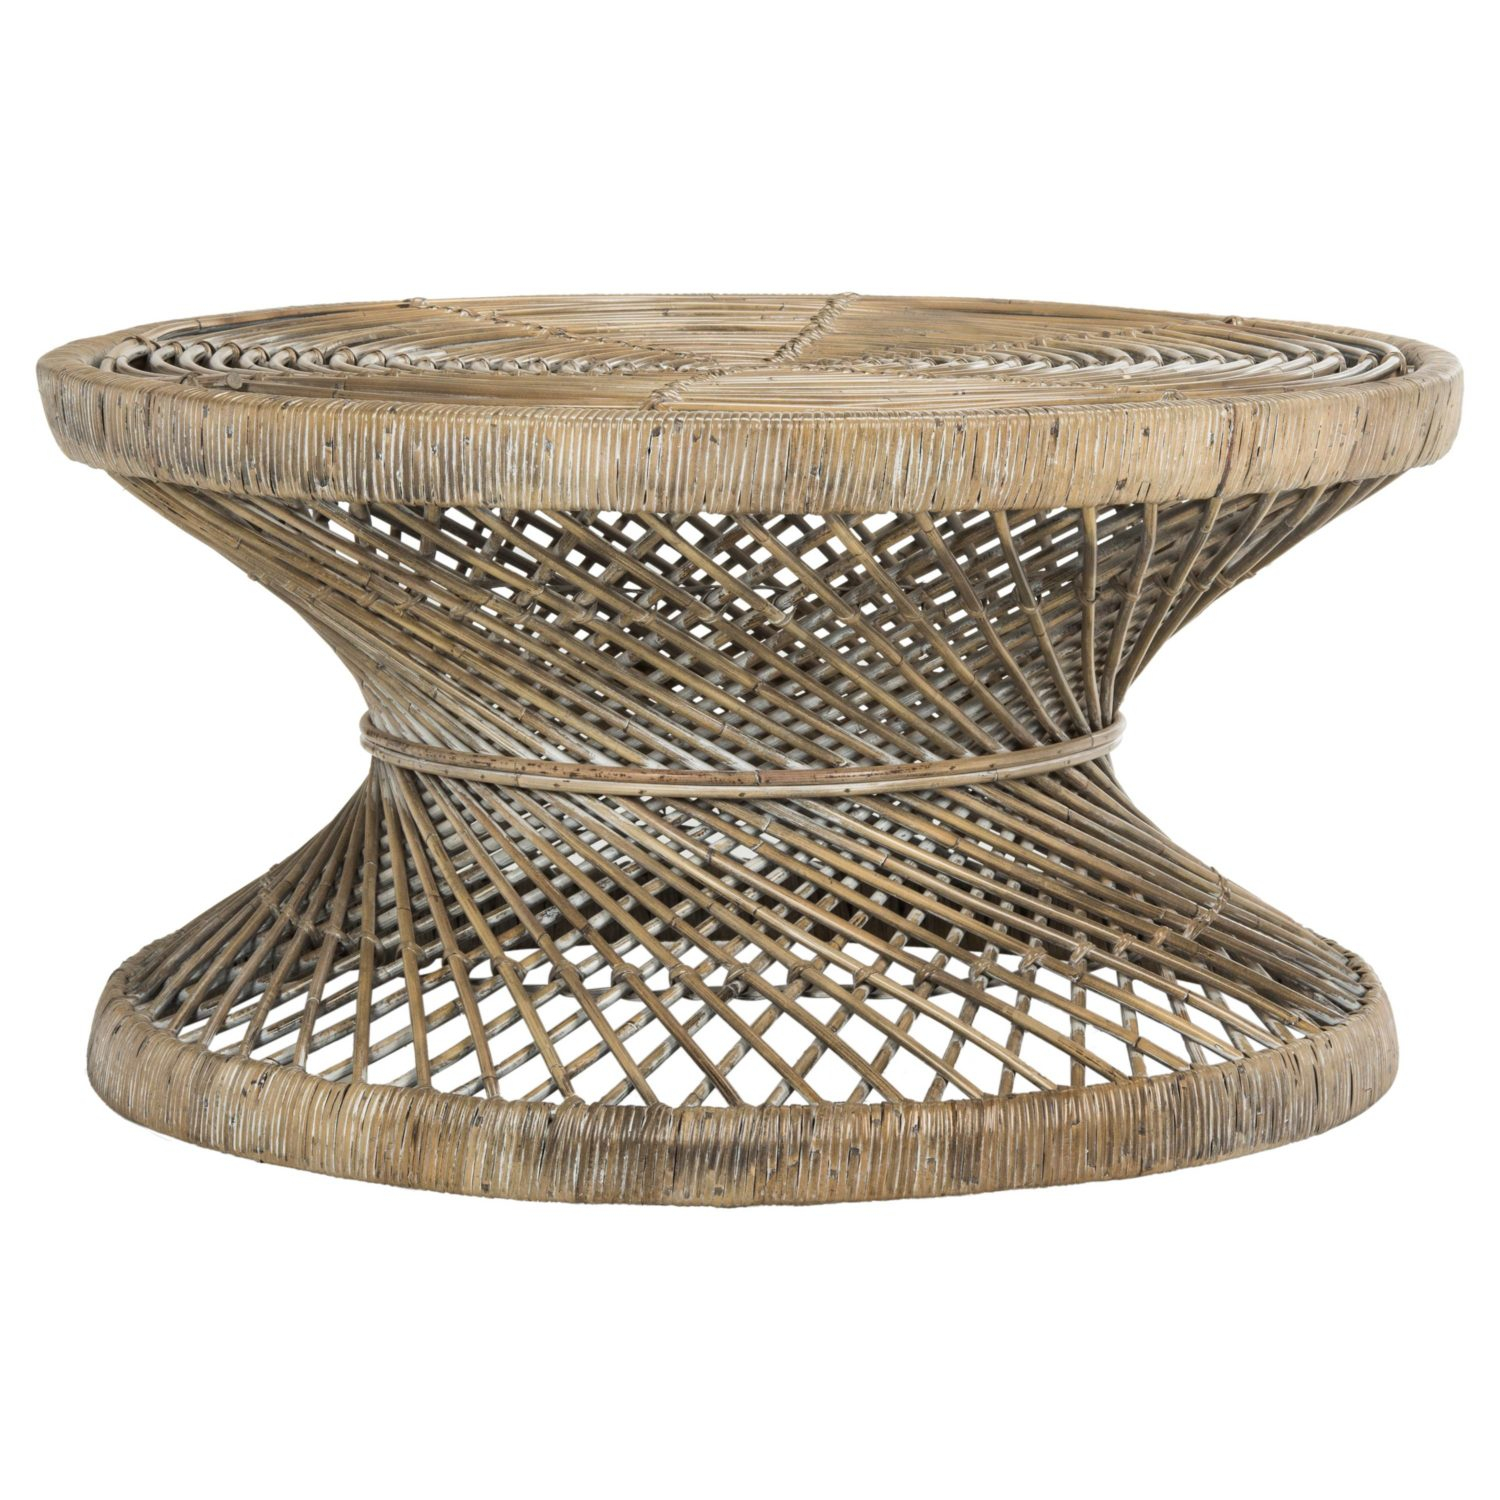 Rattan Round Coffee Table Eclectic Goods Eclectic Goods in sizing 1500 X 1500